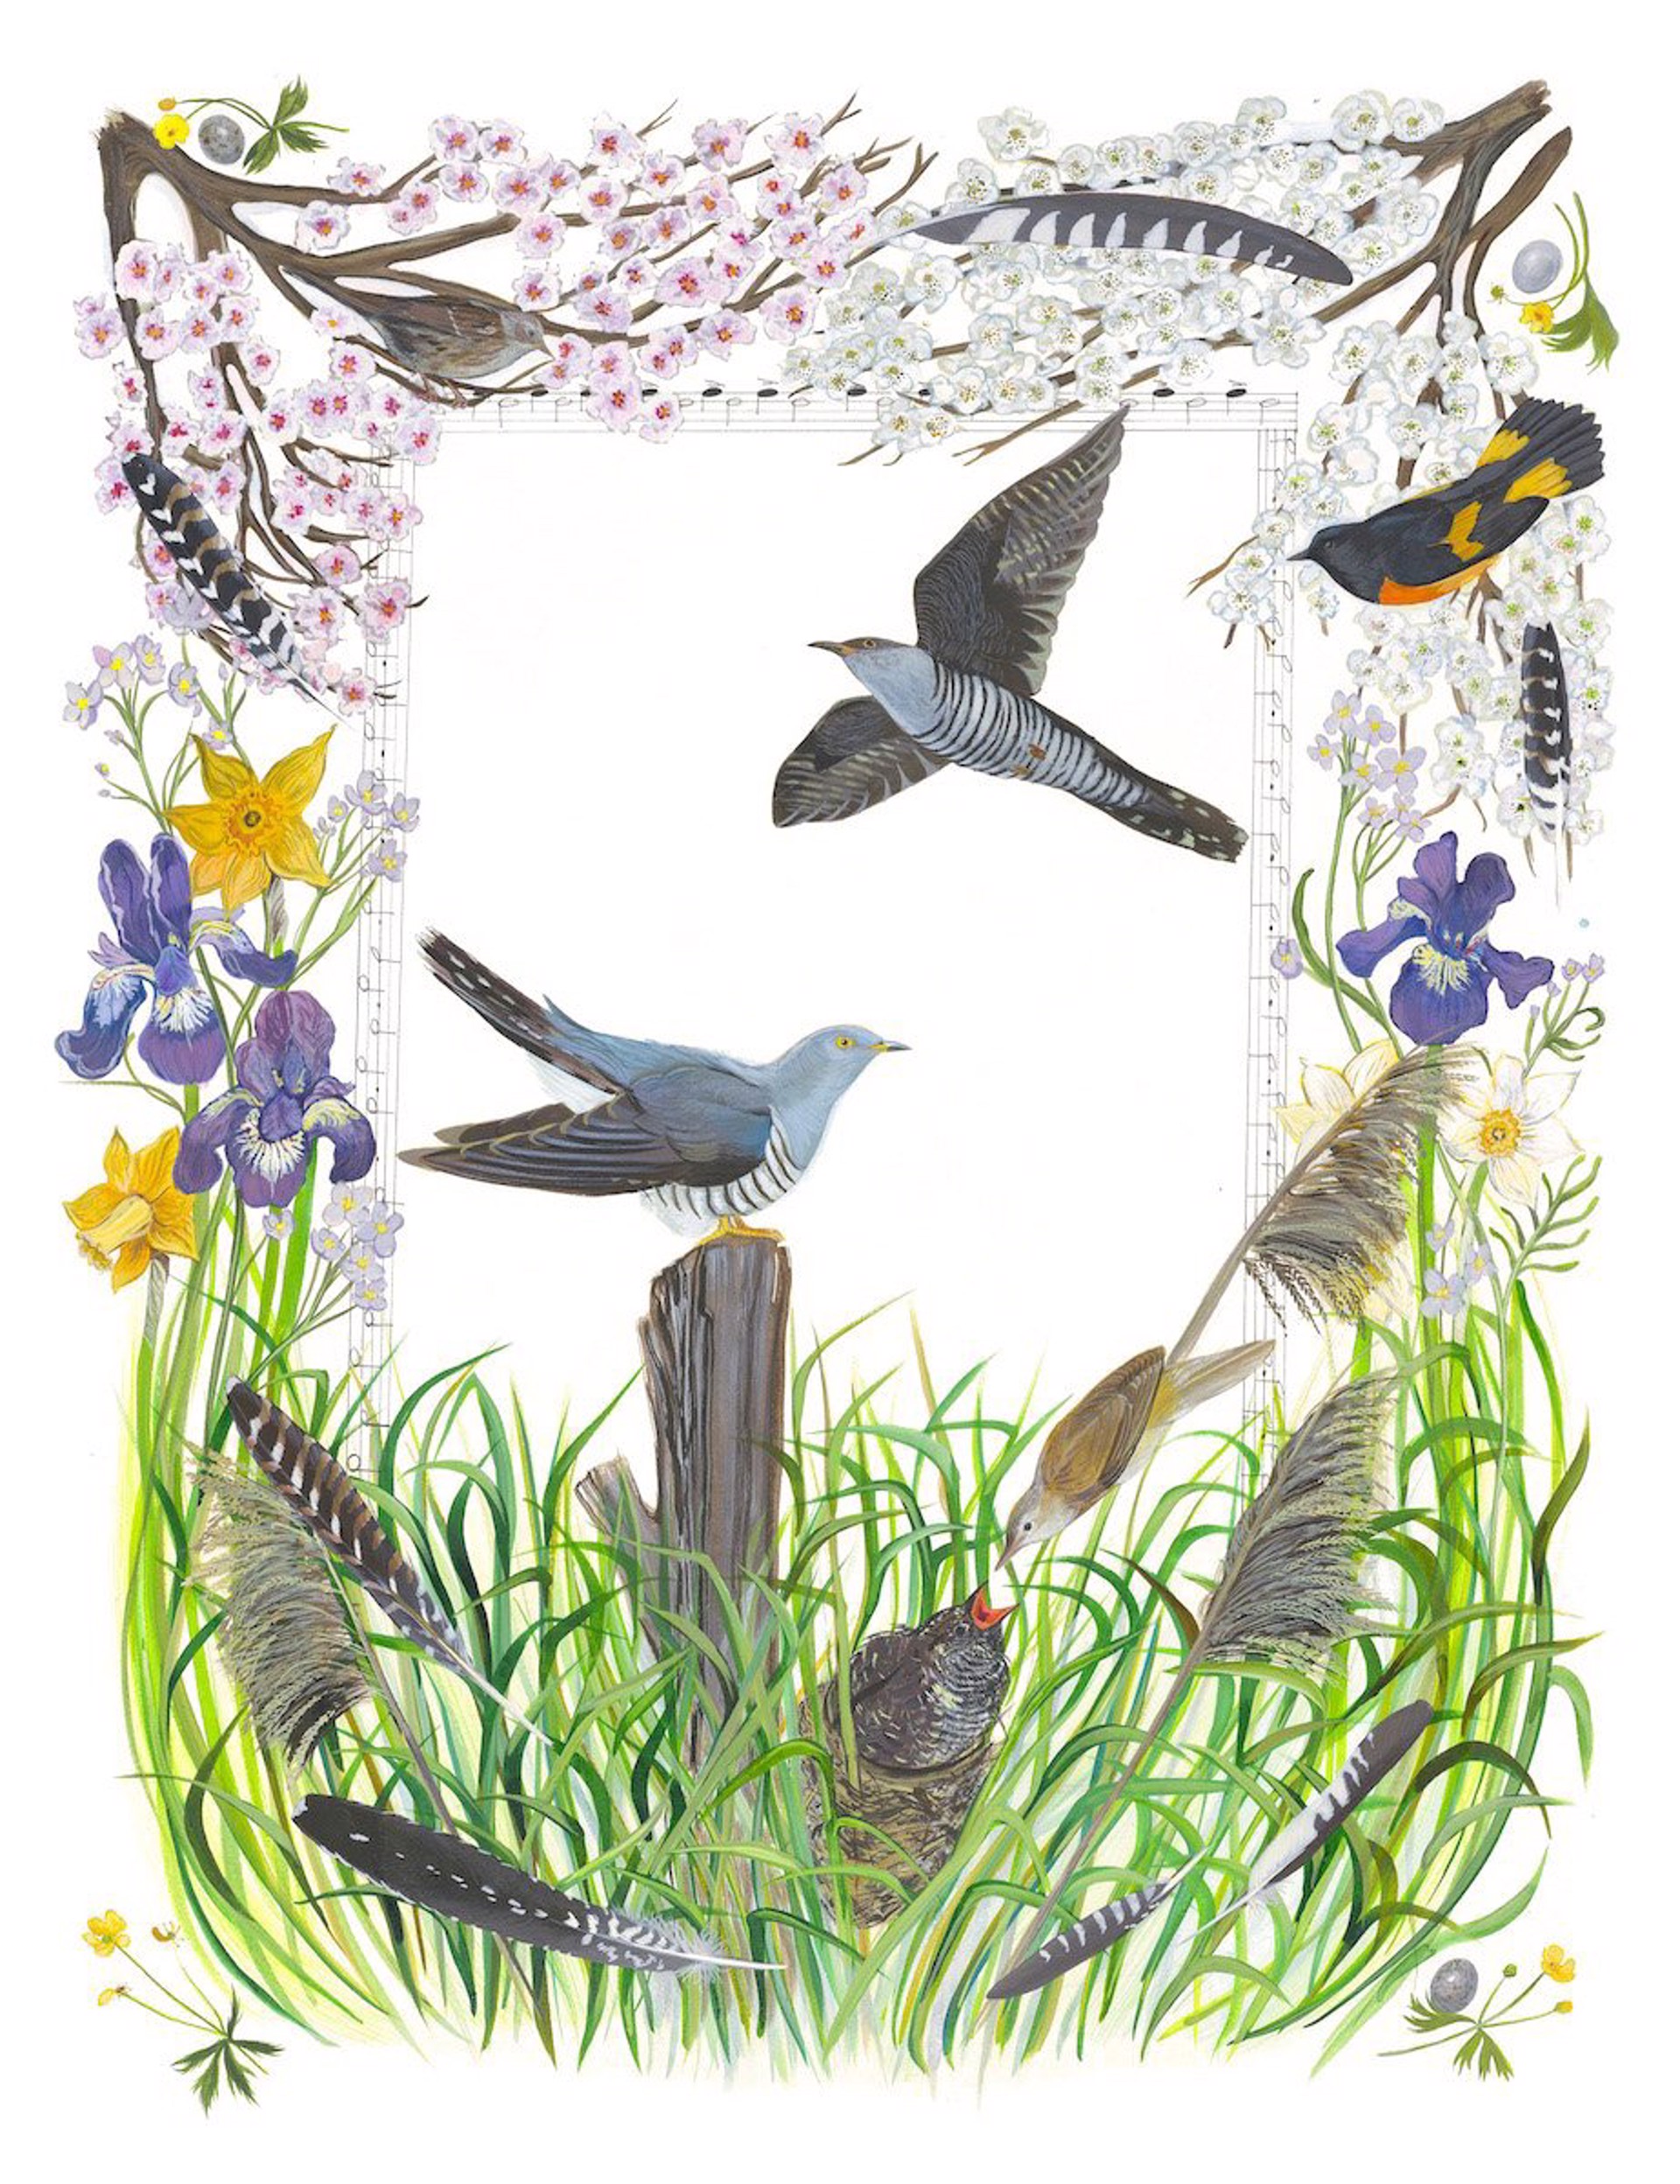 Birds of Shakespeare: Common Cuckoo (Cuculus canorus) by Missy Dunaway